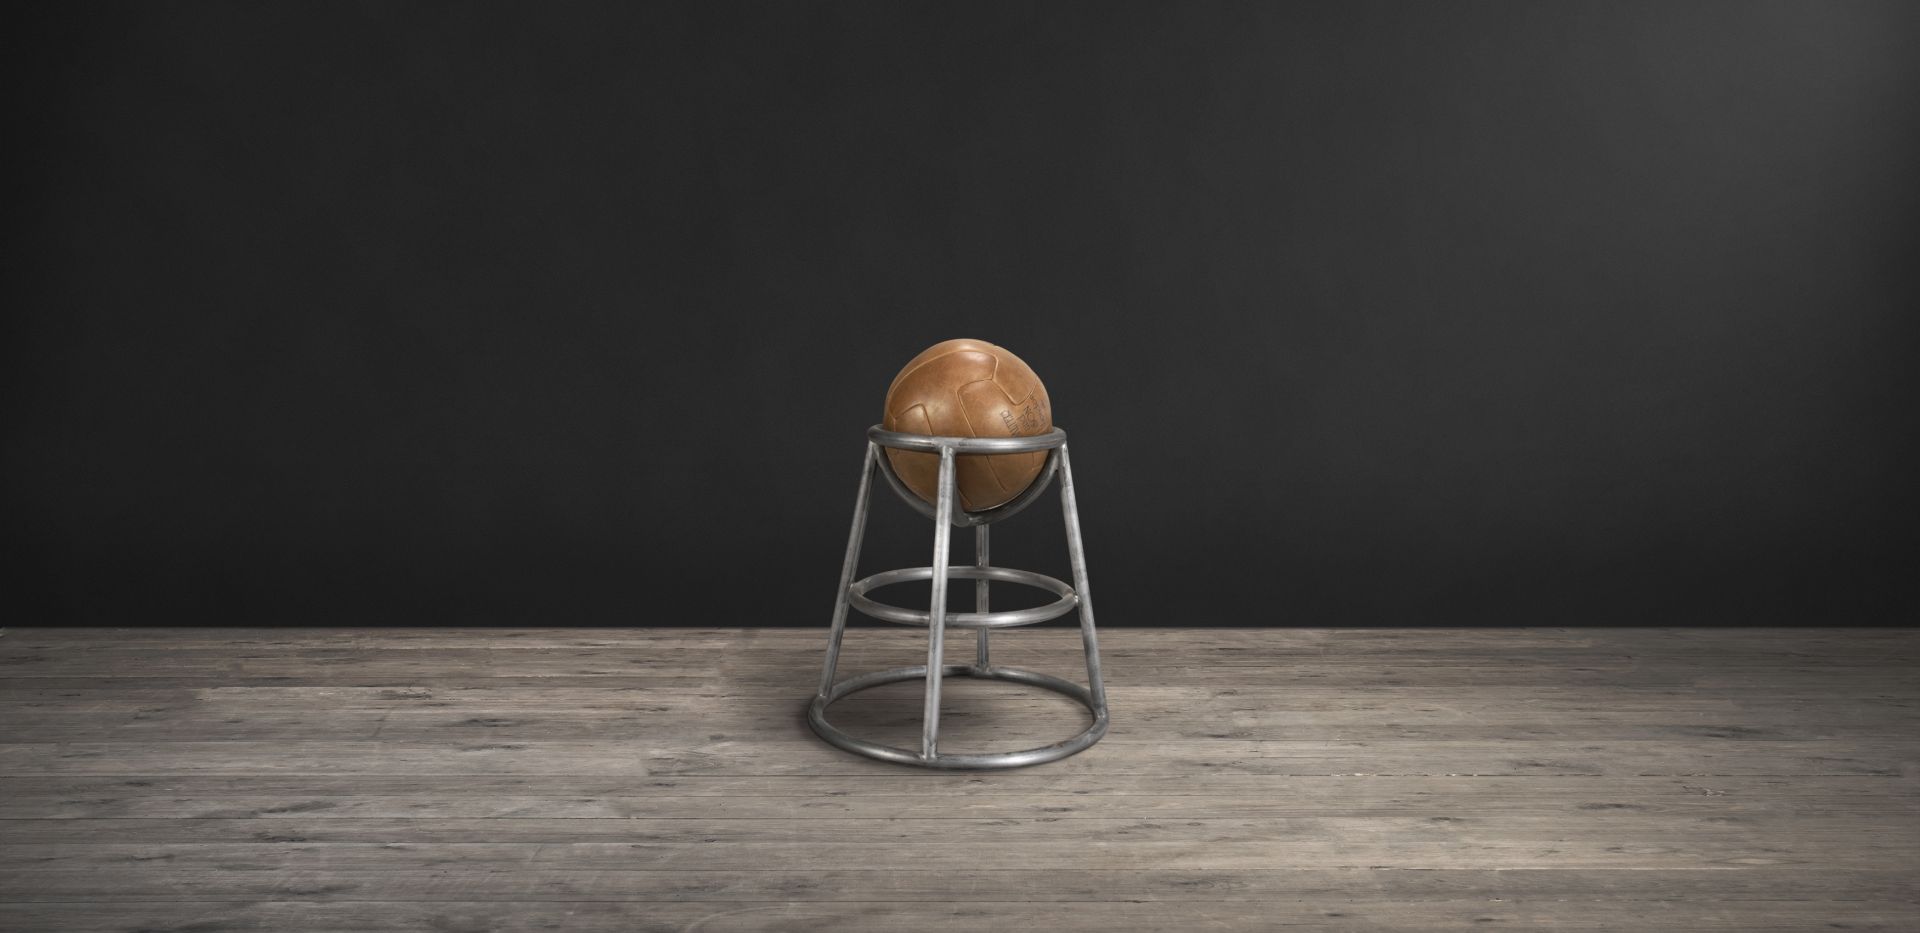 Barball 19 -This quirky Bar Ball stool with its removable leather football jauntily perched on a